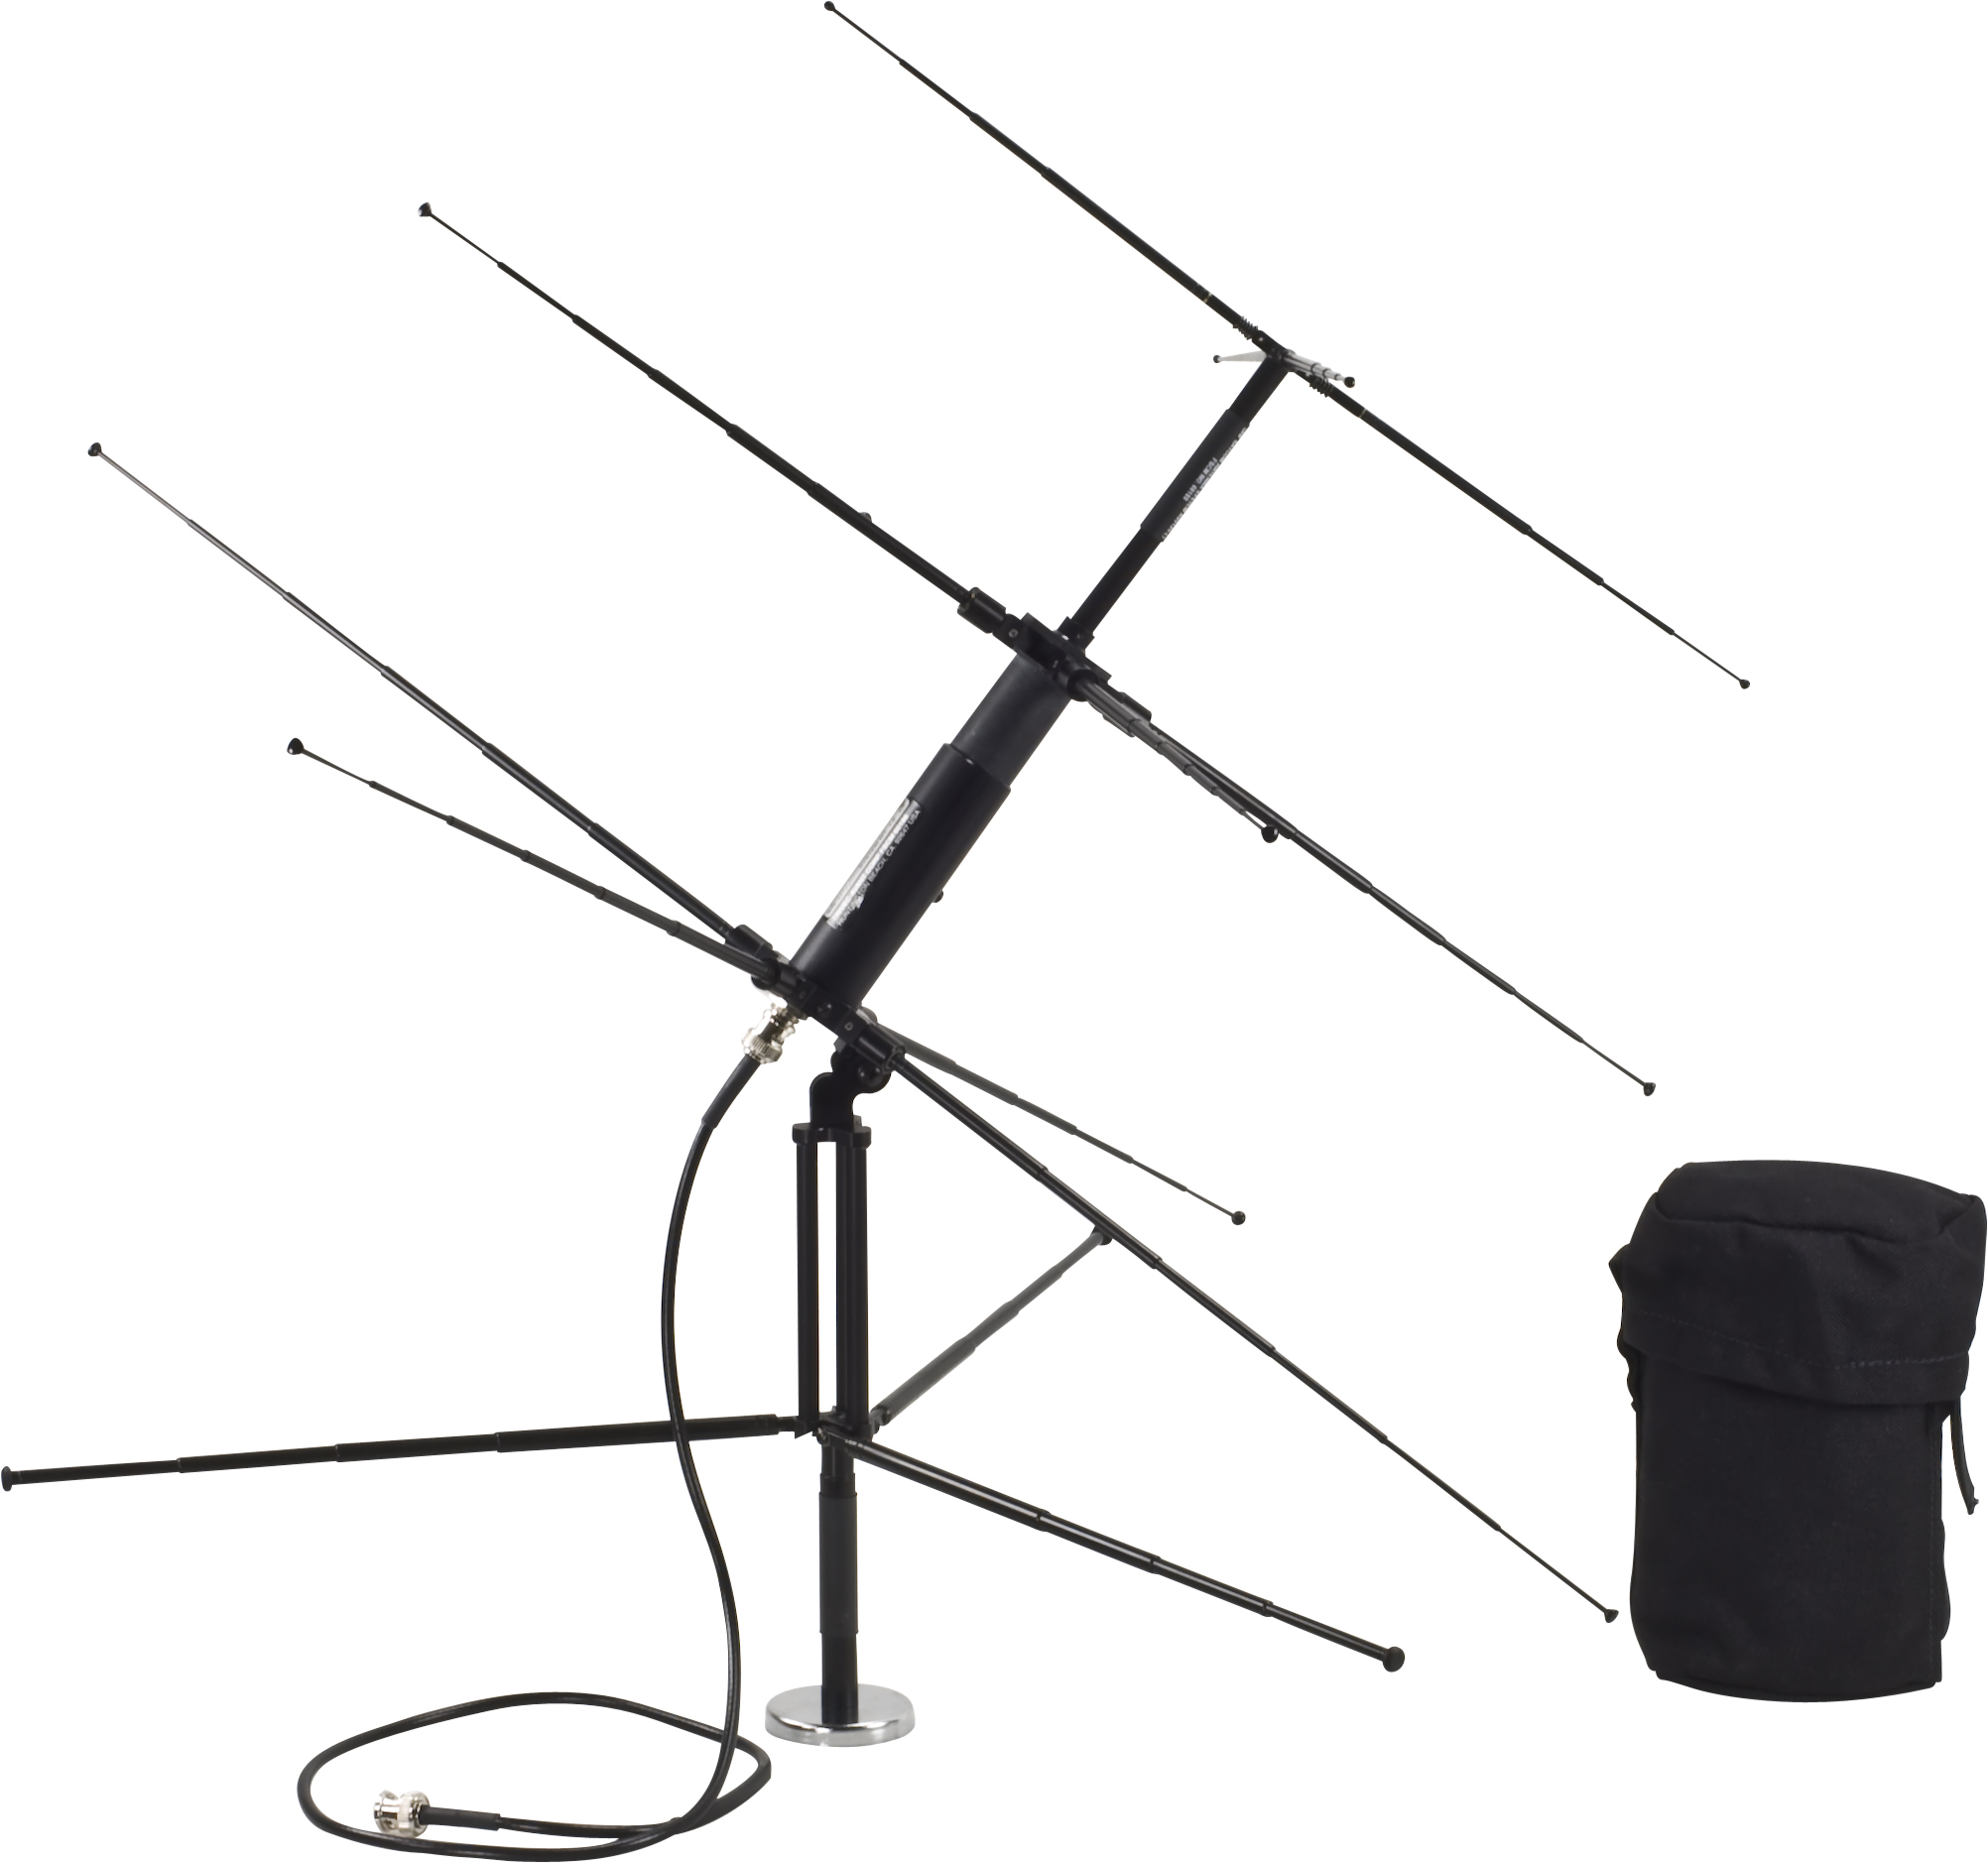 View all posts by Antennas Store.